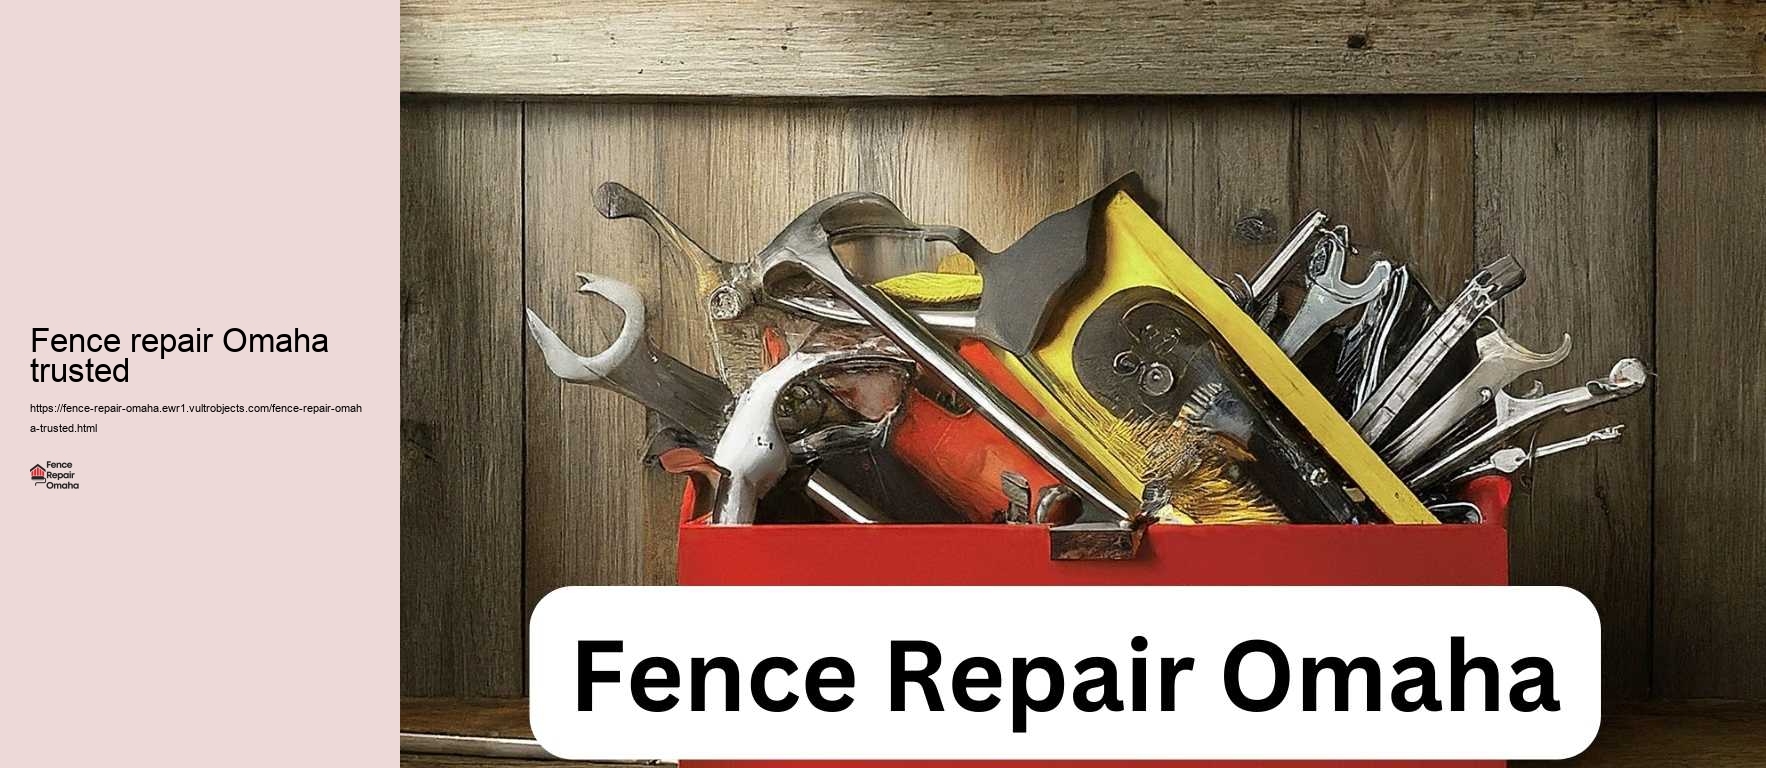 Fence repair Omaha trusted